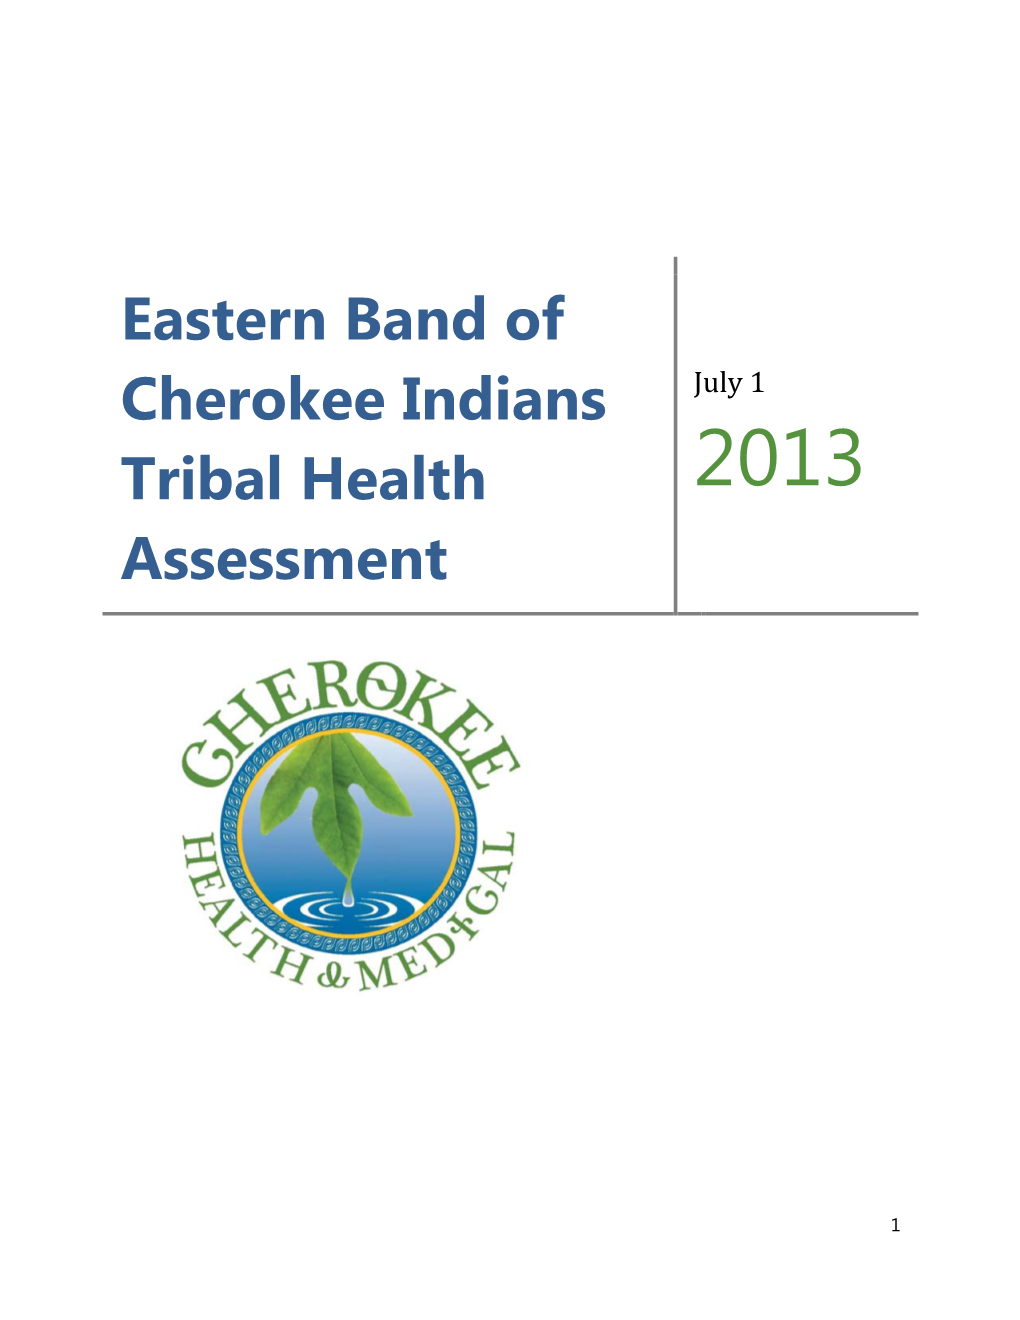 Eastern Band of Cherokee Indians Tribal Health Assessment